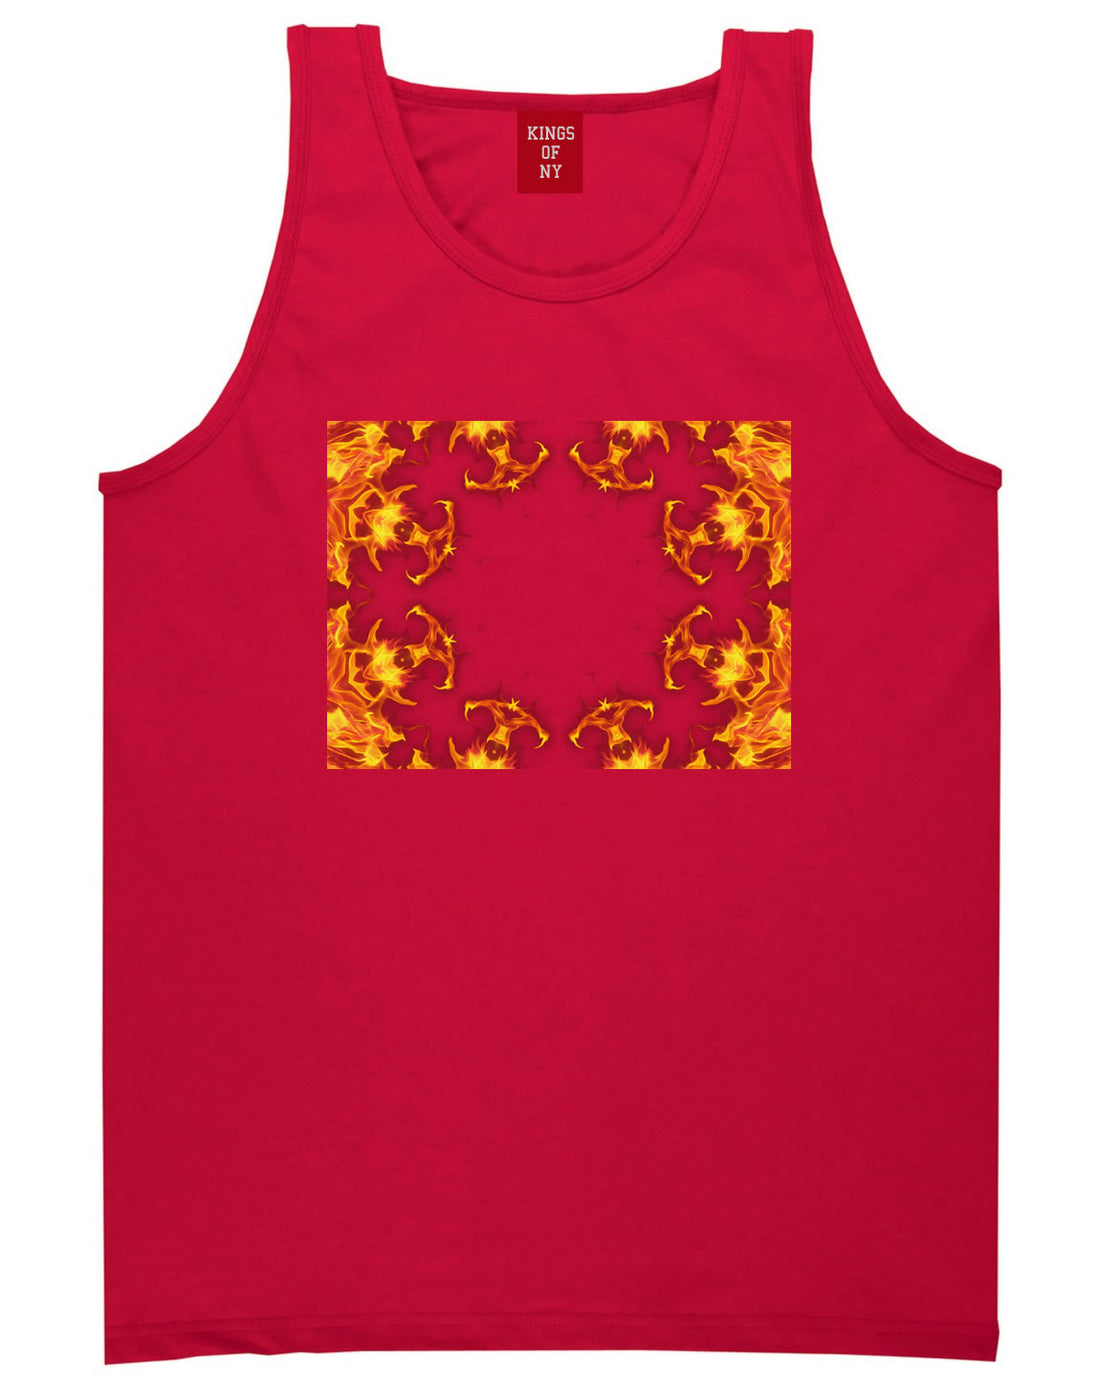 Flames of Fire Gold Frame Tank Top in Red By Kings Of NY